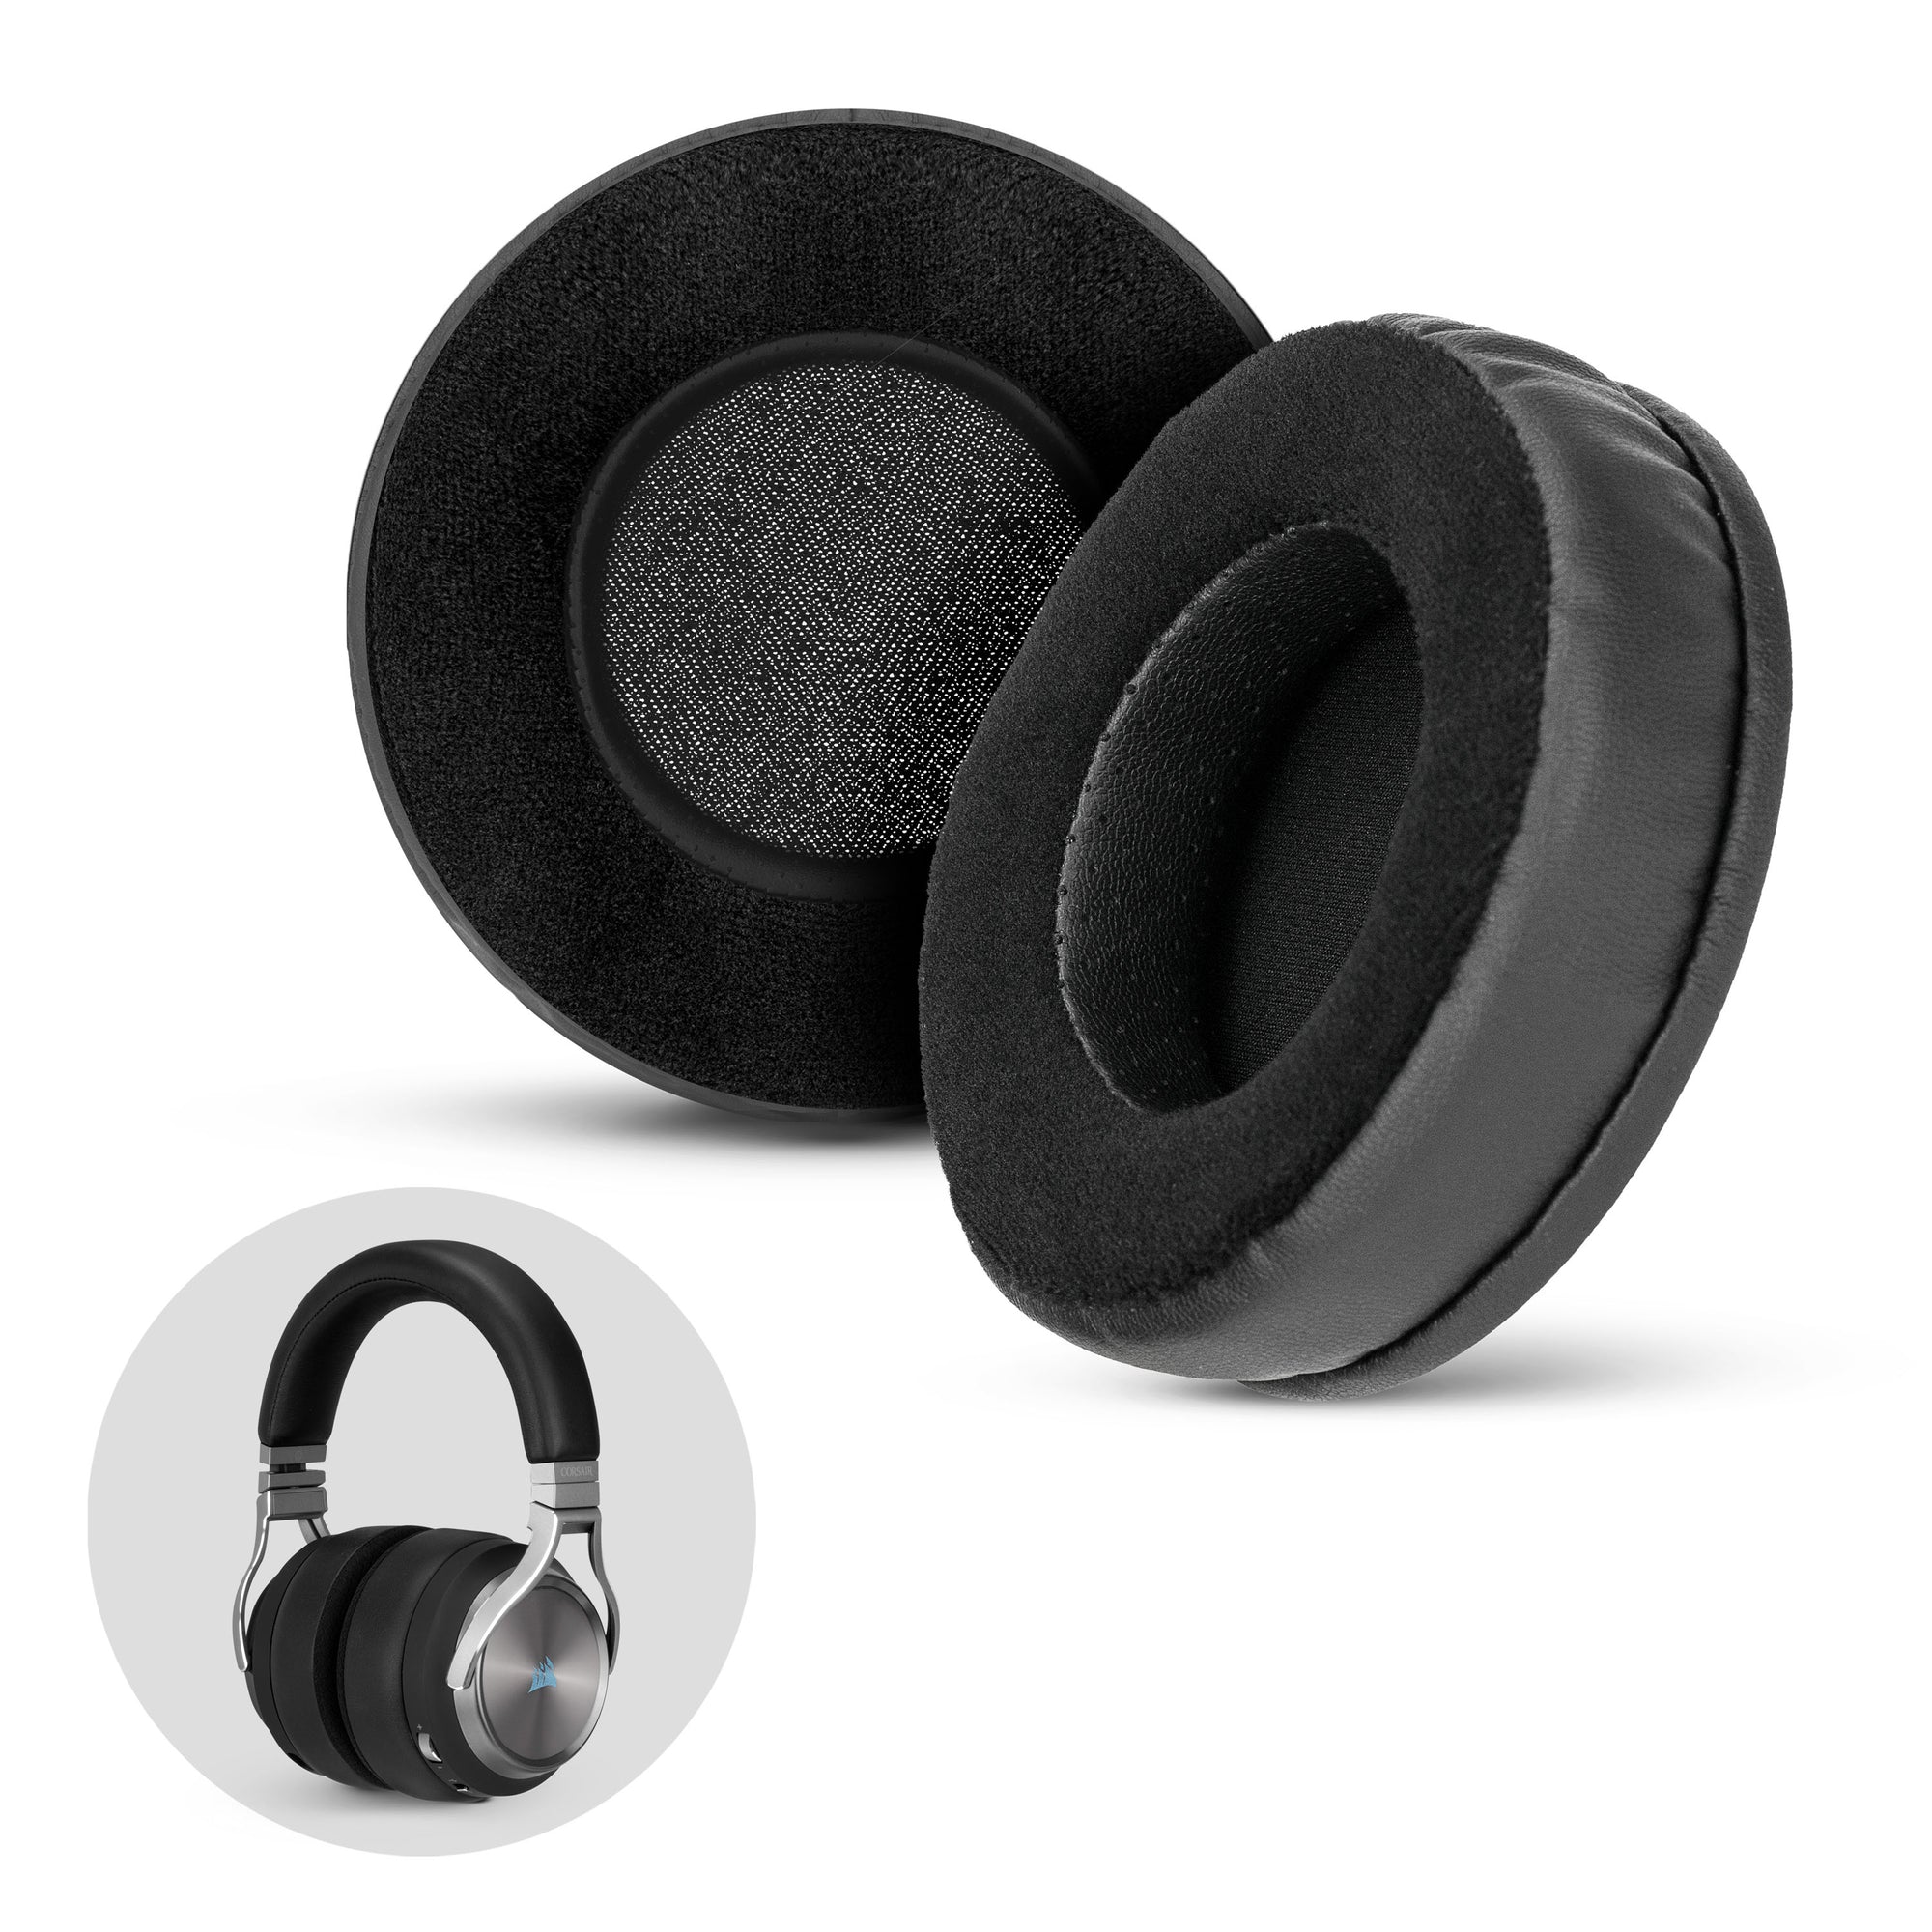 Hybrid Thick Earpads for Corsair Virtuoso RGB Headset (Wireless/XT/SE) - Memory Foam with Velour & PU Leather Hybrid Material